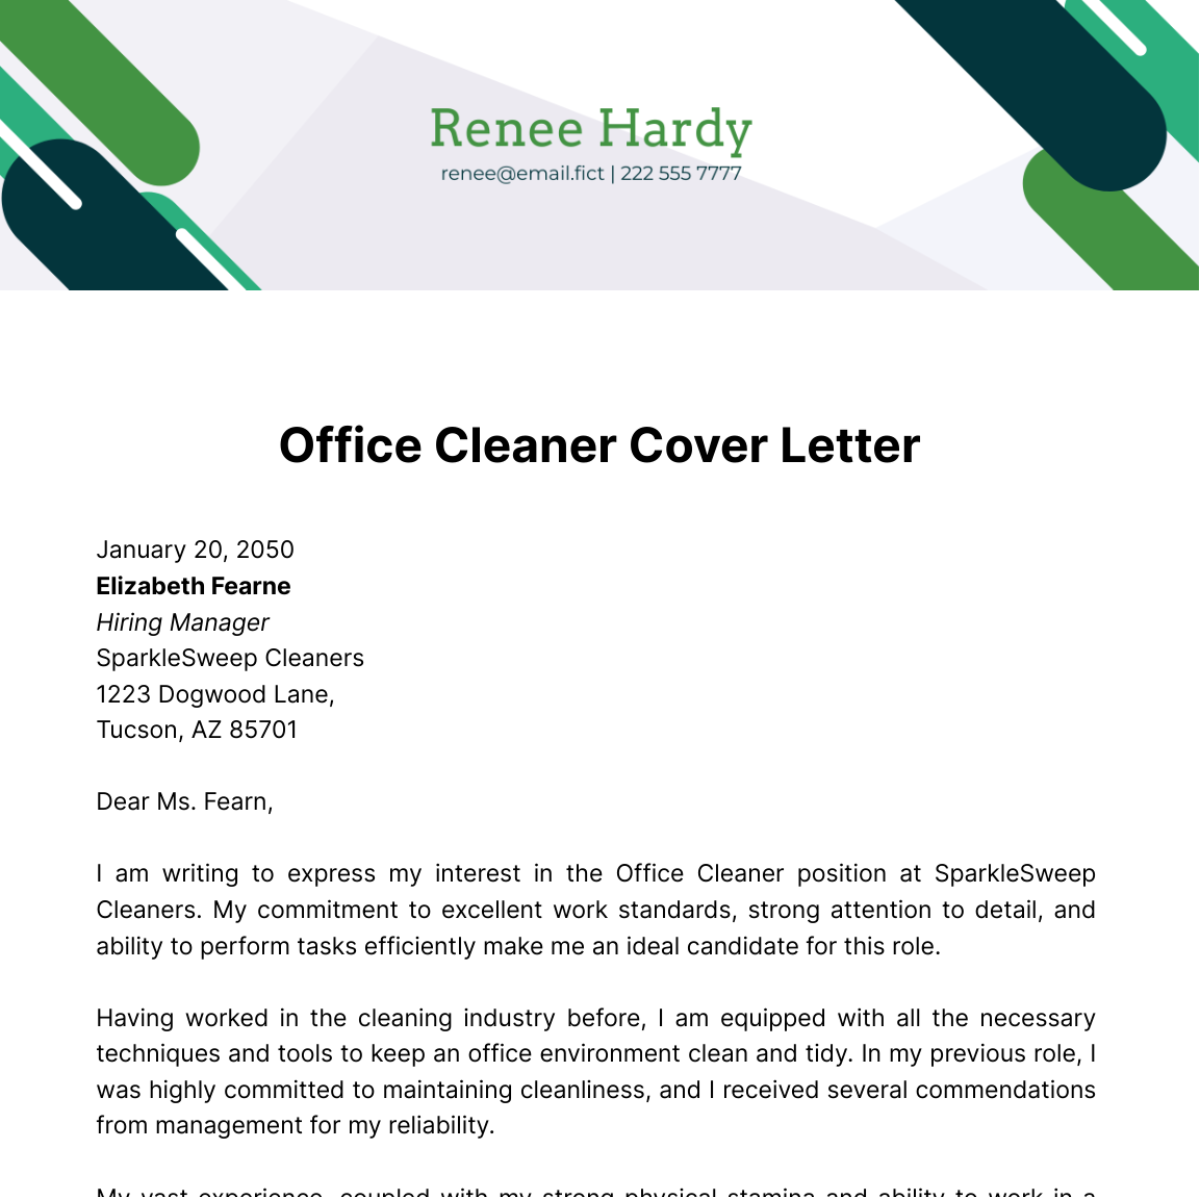 Office Cleaner Cover Letter Template